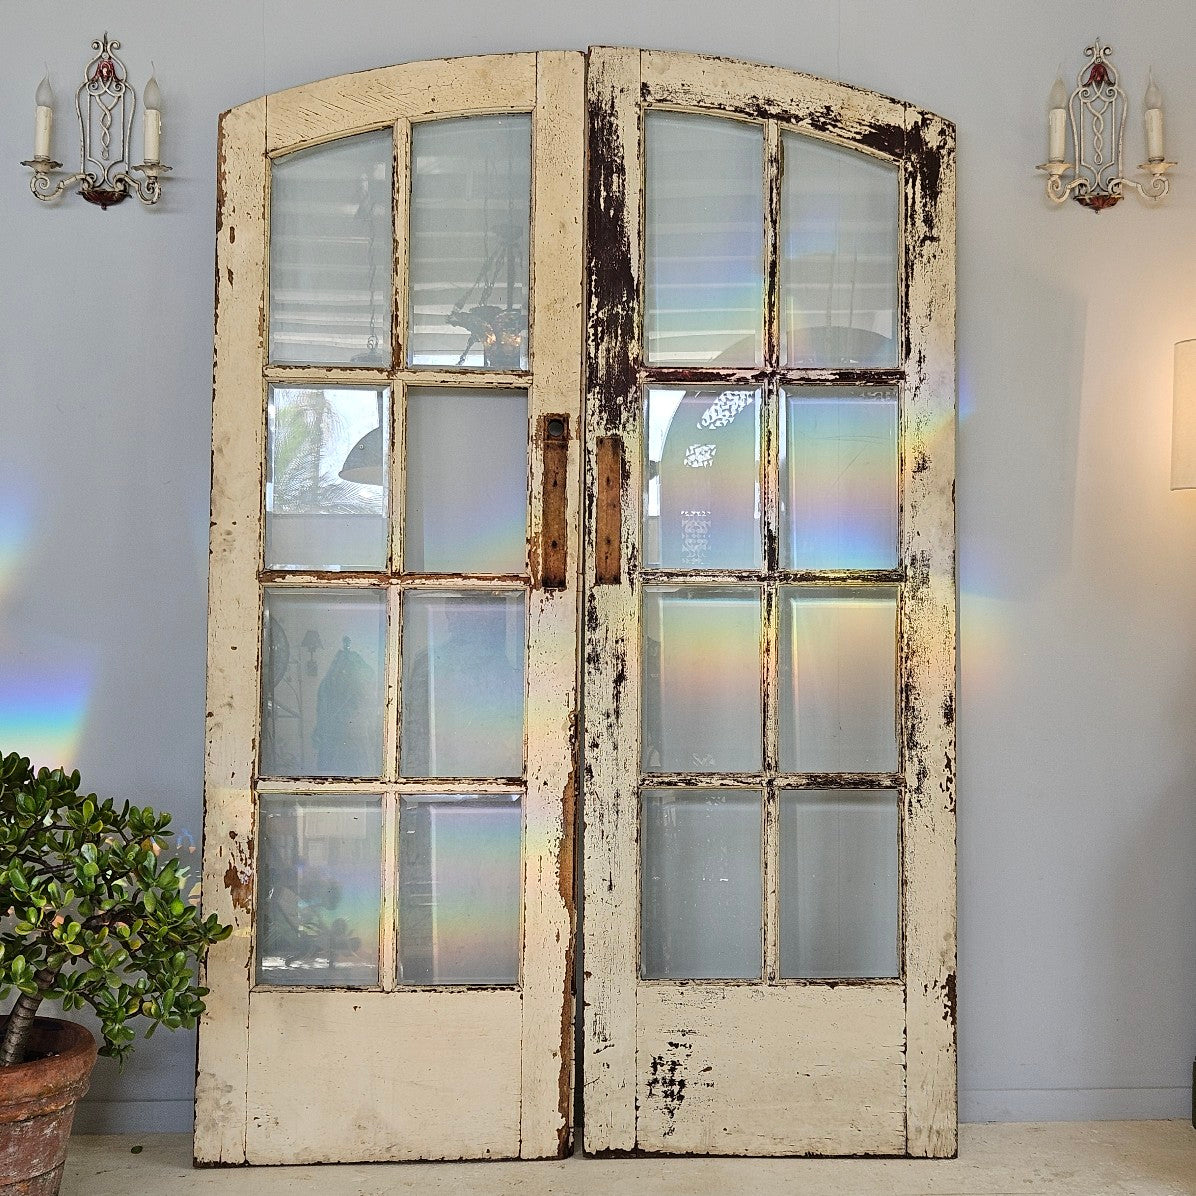 Arched Colonial French Doors